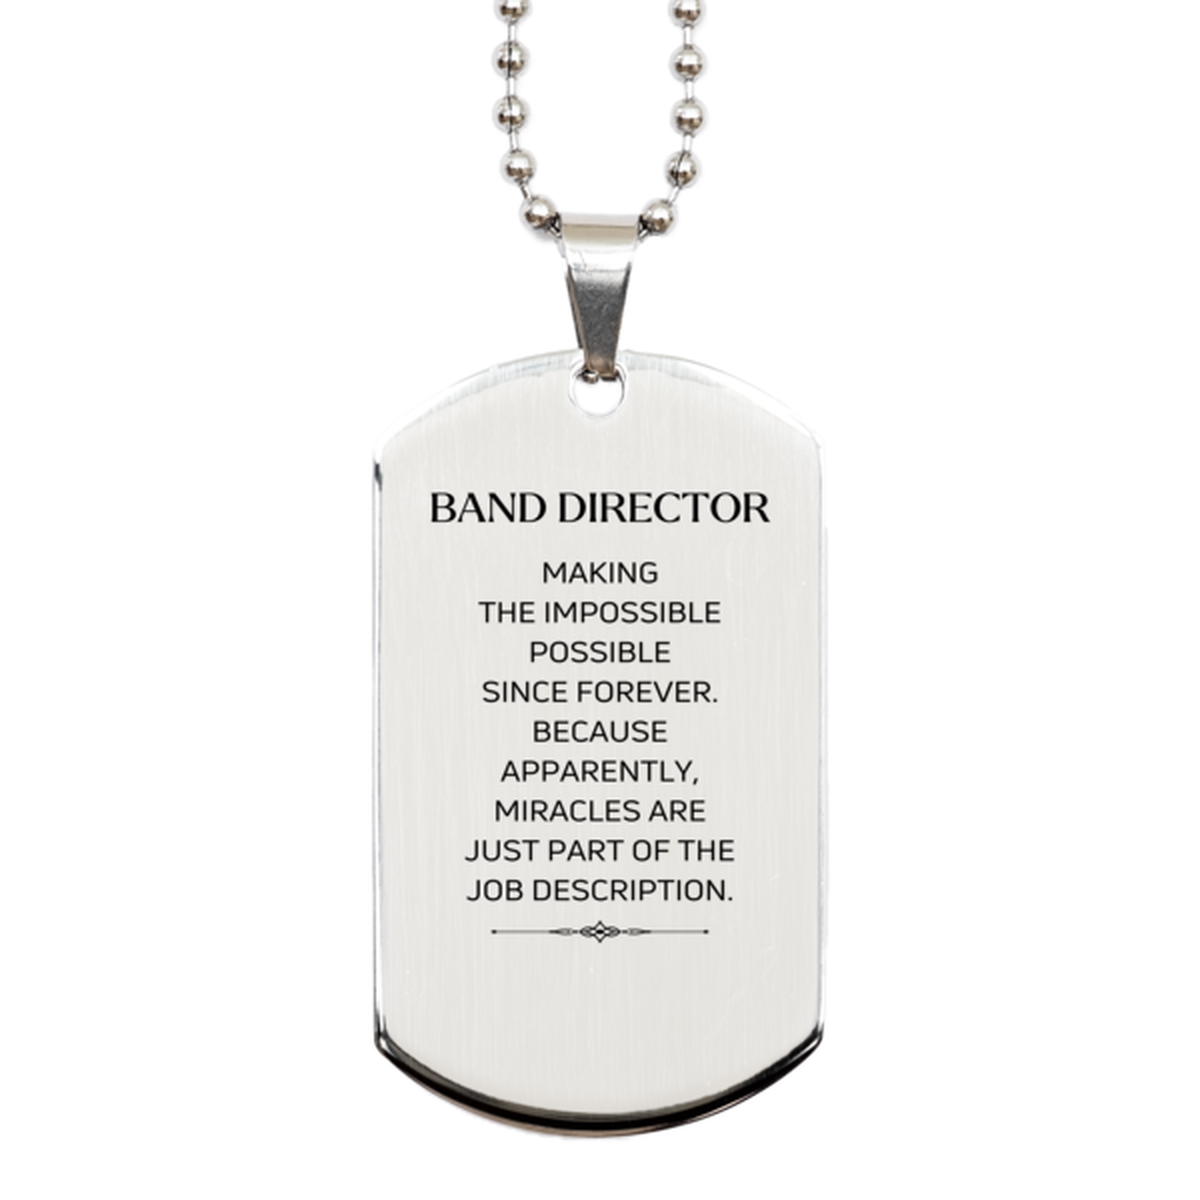 Funny Band Director Gifts, Miracles are just part of the job description, Inspirational Birthday Silver Dog Tag For Band Director, Men, Women, Coworkers, Friends, Boss